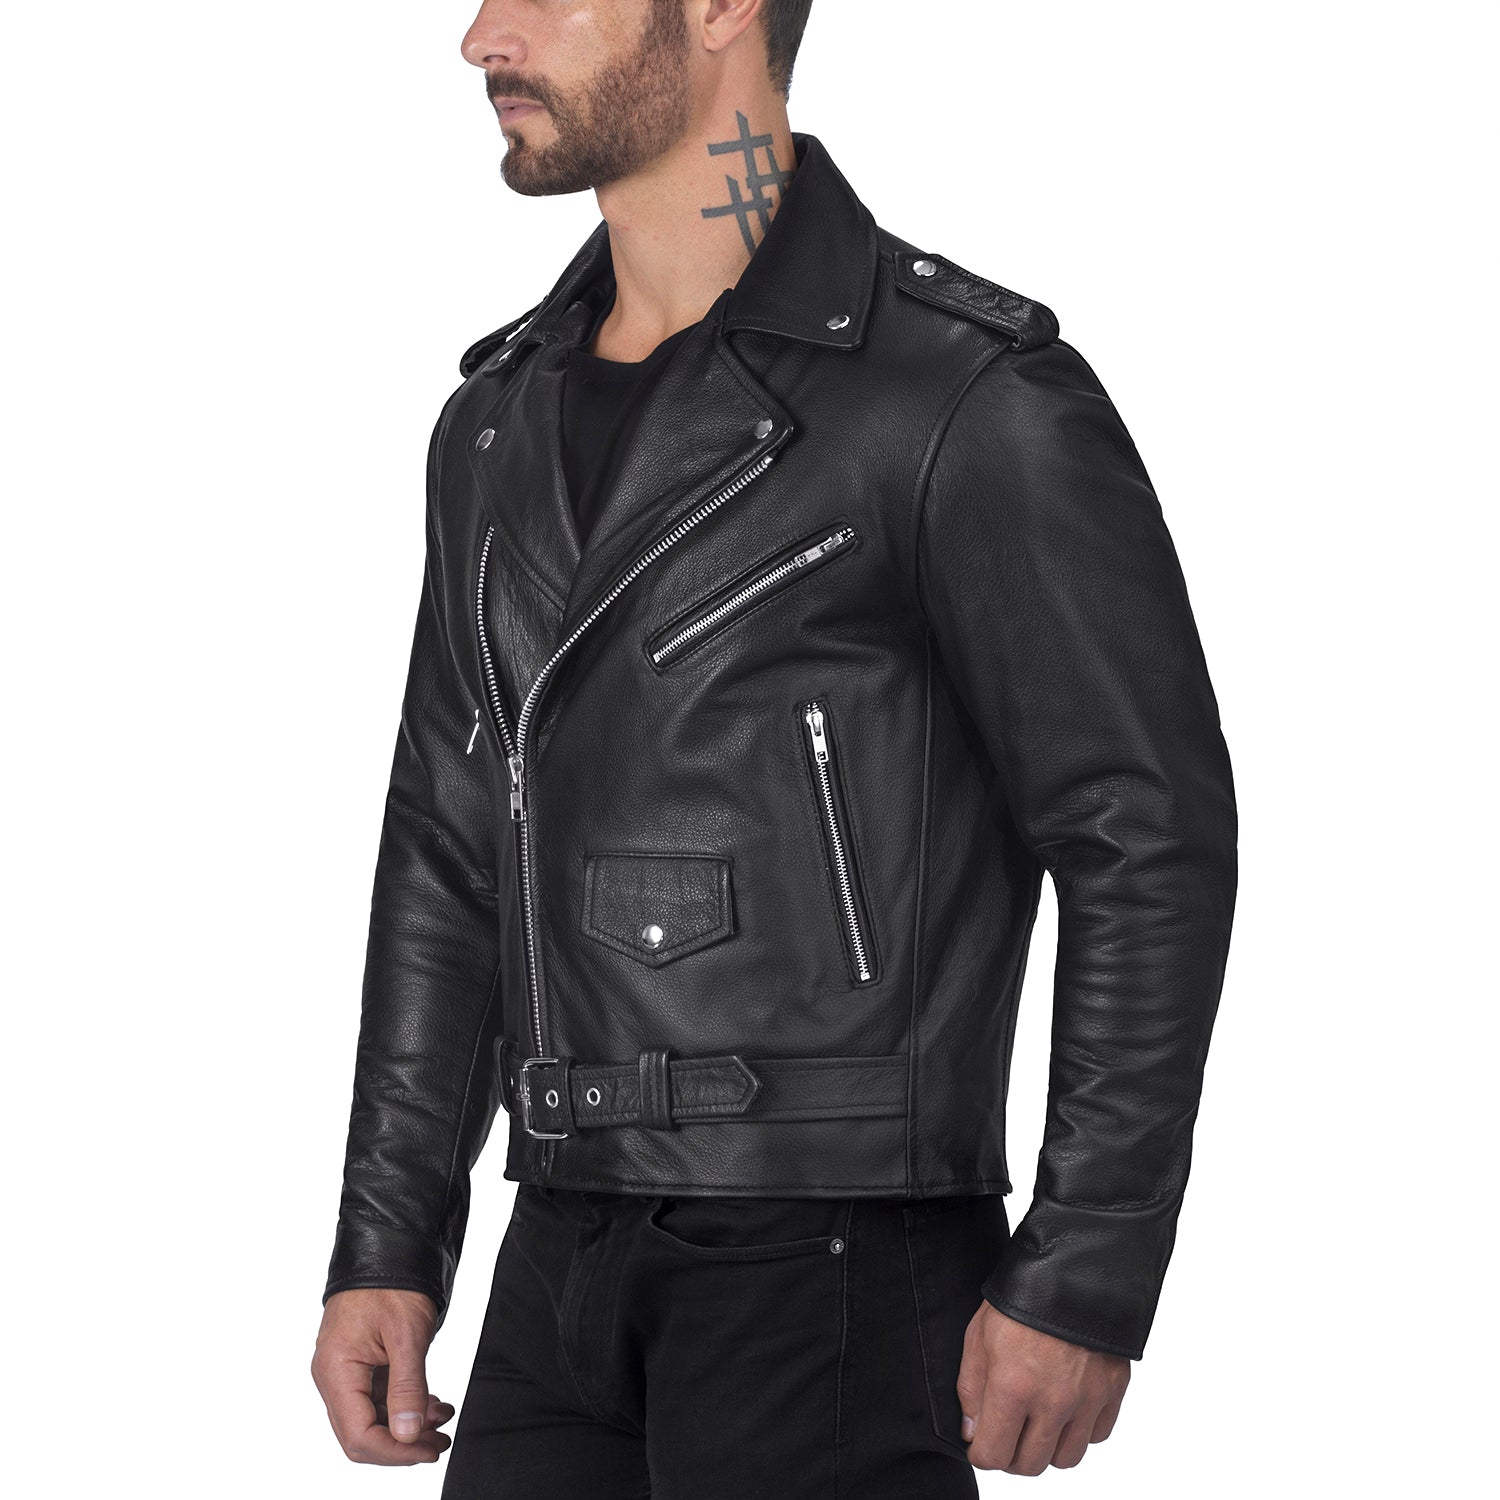 Full Sleeves Leather Biker Jacket, Occasion : Driving, Feature :  Comfortable, Easy Washable, Quick Dry at USD 35 - USD 75 / Piece in Kanpur